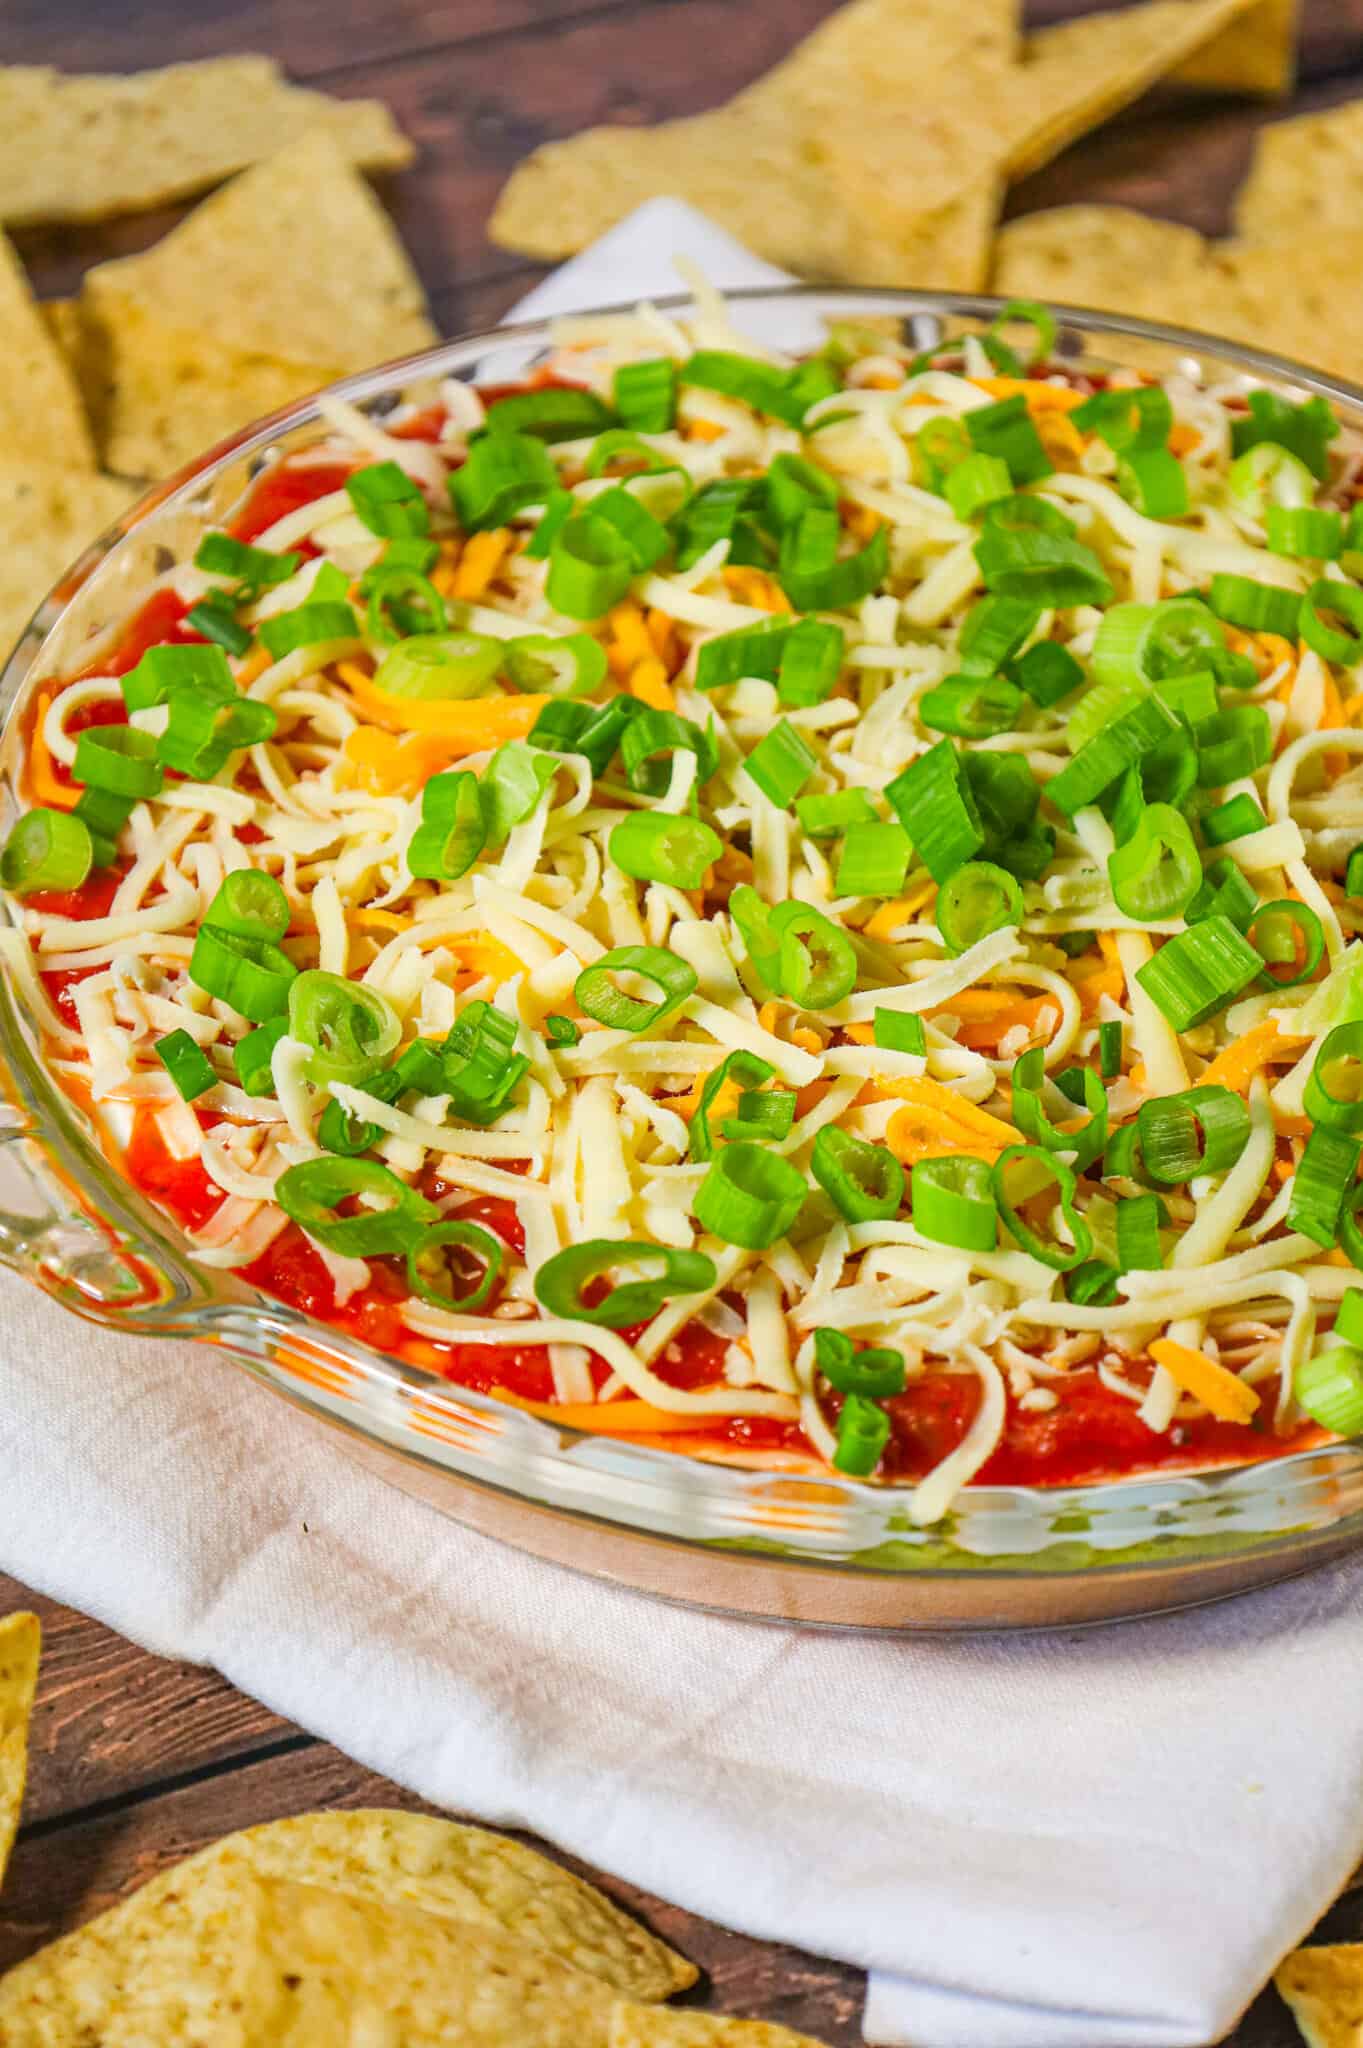  5 Layer Dip is a delicious cold dip recipe made with refried beans, cream cheese, taco seasoning, guacamole, sour cream, salsa, shredded cheese and chopped green onions.